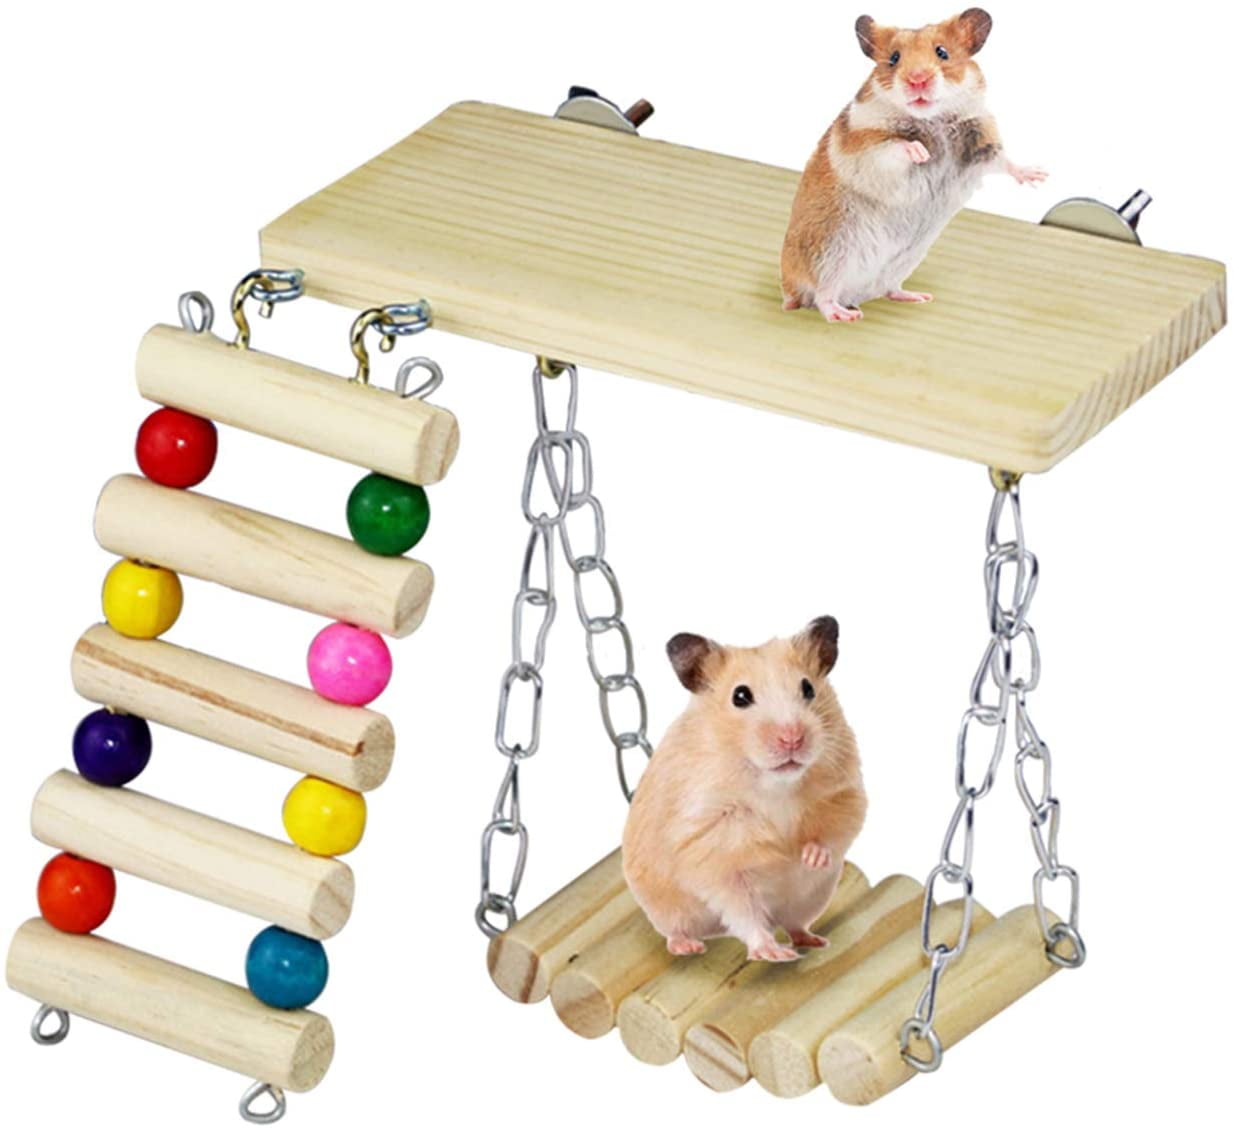 Useful Pet Hamster Mouse Wooden Swing Hammock Small Animal Swing Play Toys US 